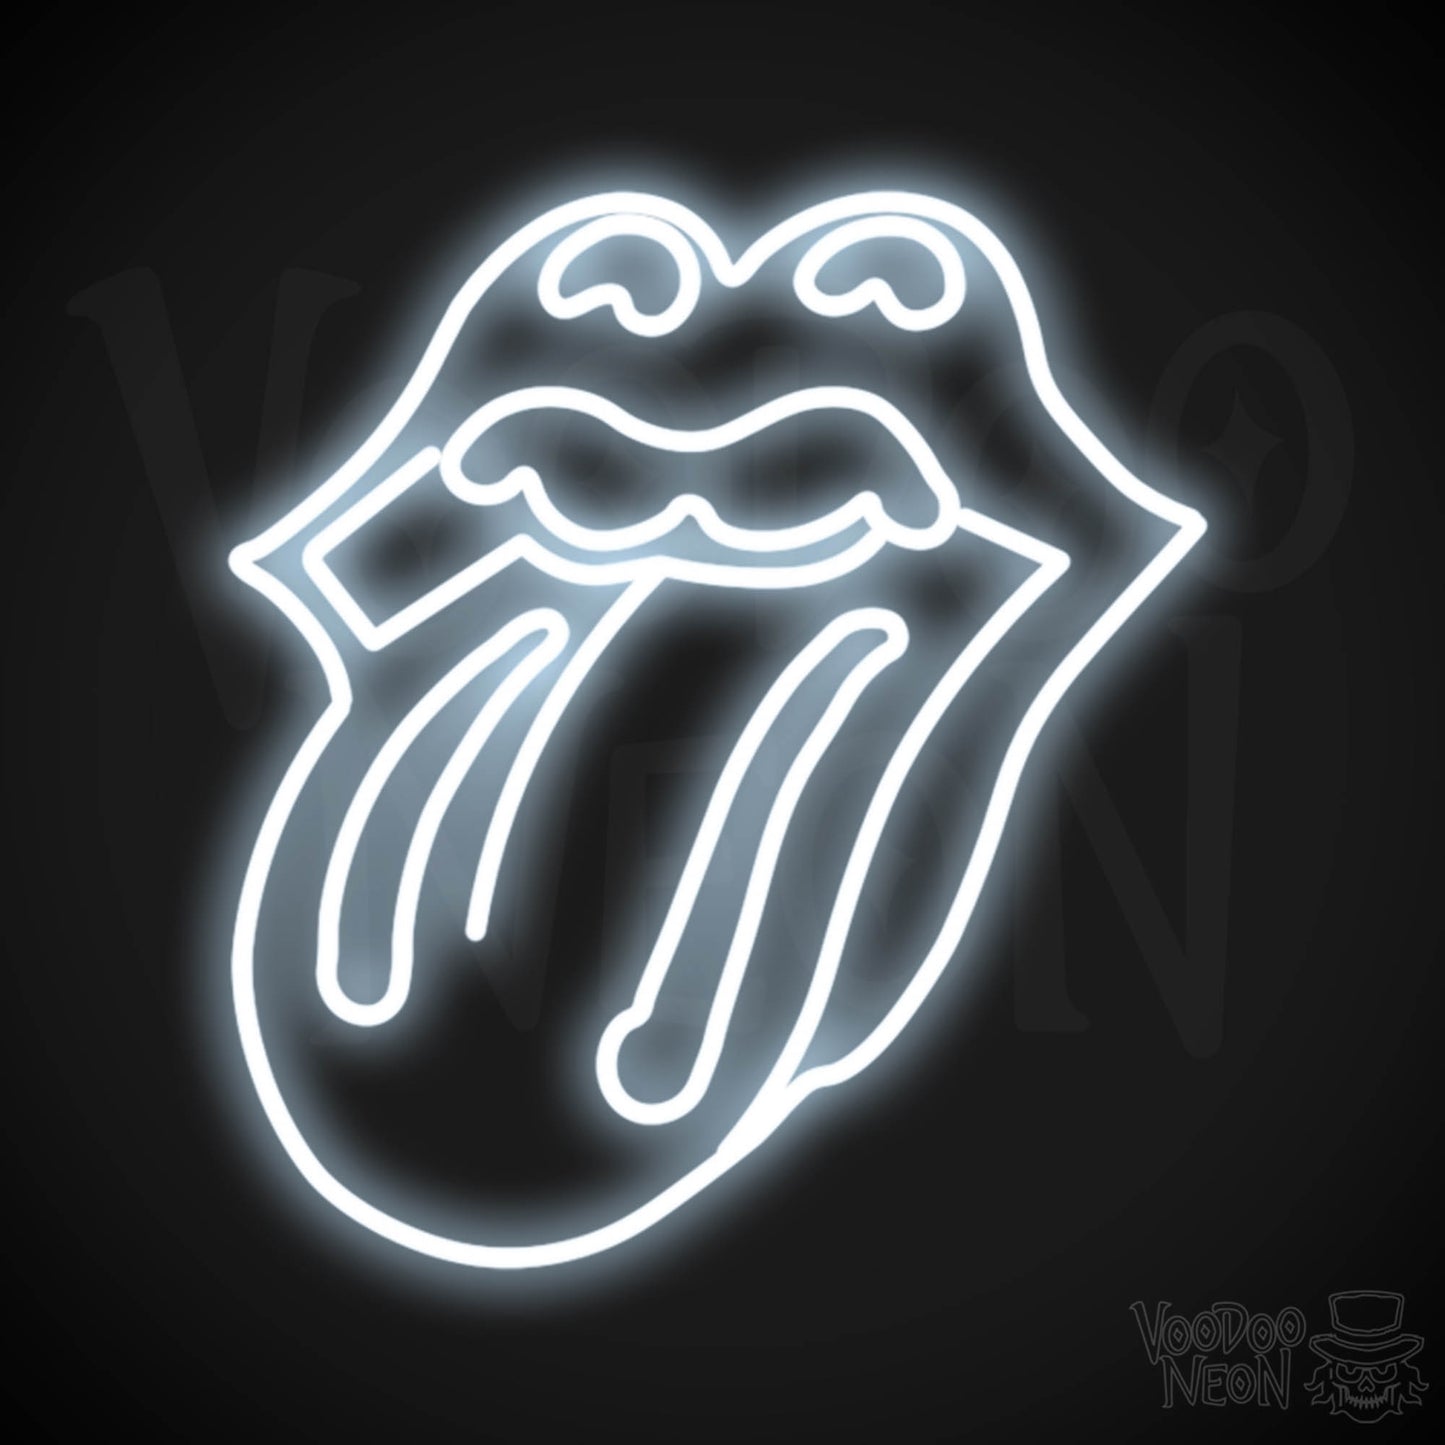 Rolling Stones Neon Sign - Rolling Stones Sign - Neon Rolling Stones Logo Wall Art - Color Cool White